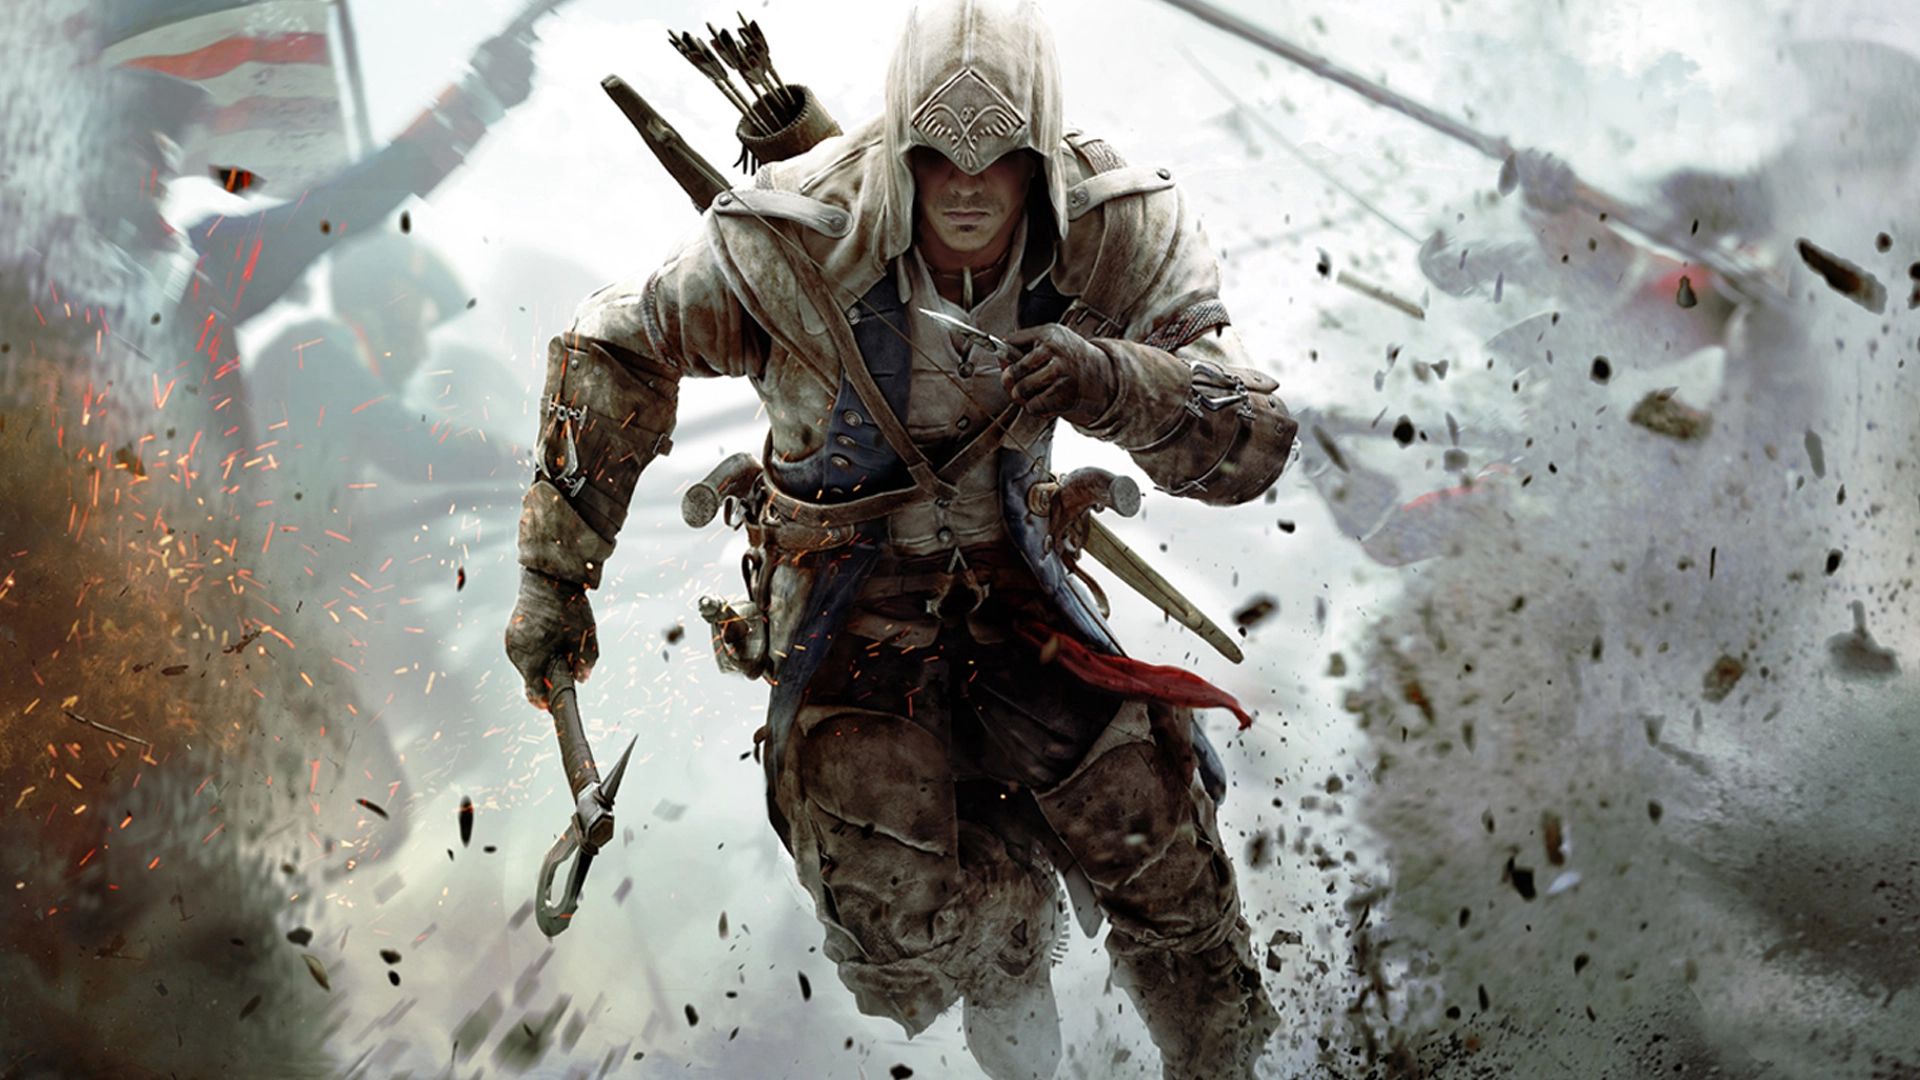 New Assassin's Creed to be revealed at Ubisoft Forward (including one set in Japan)